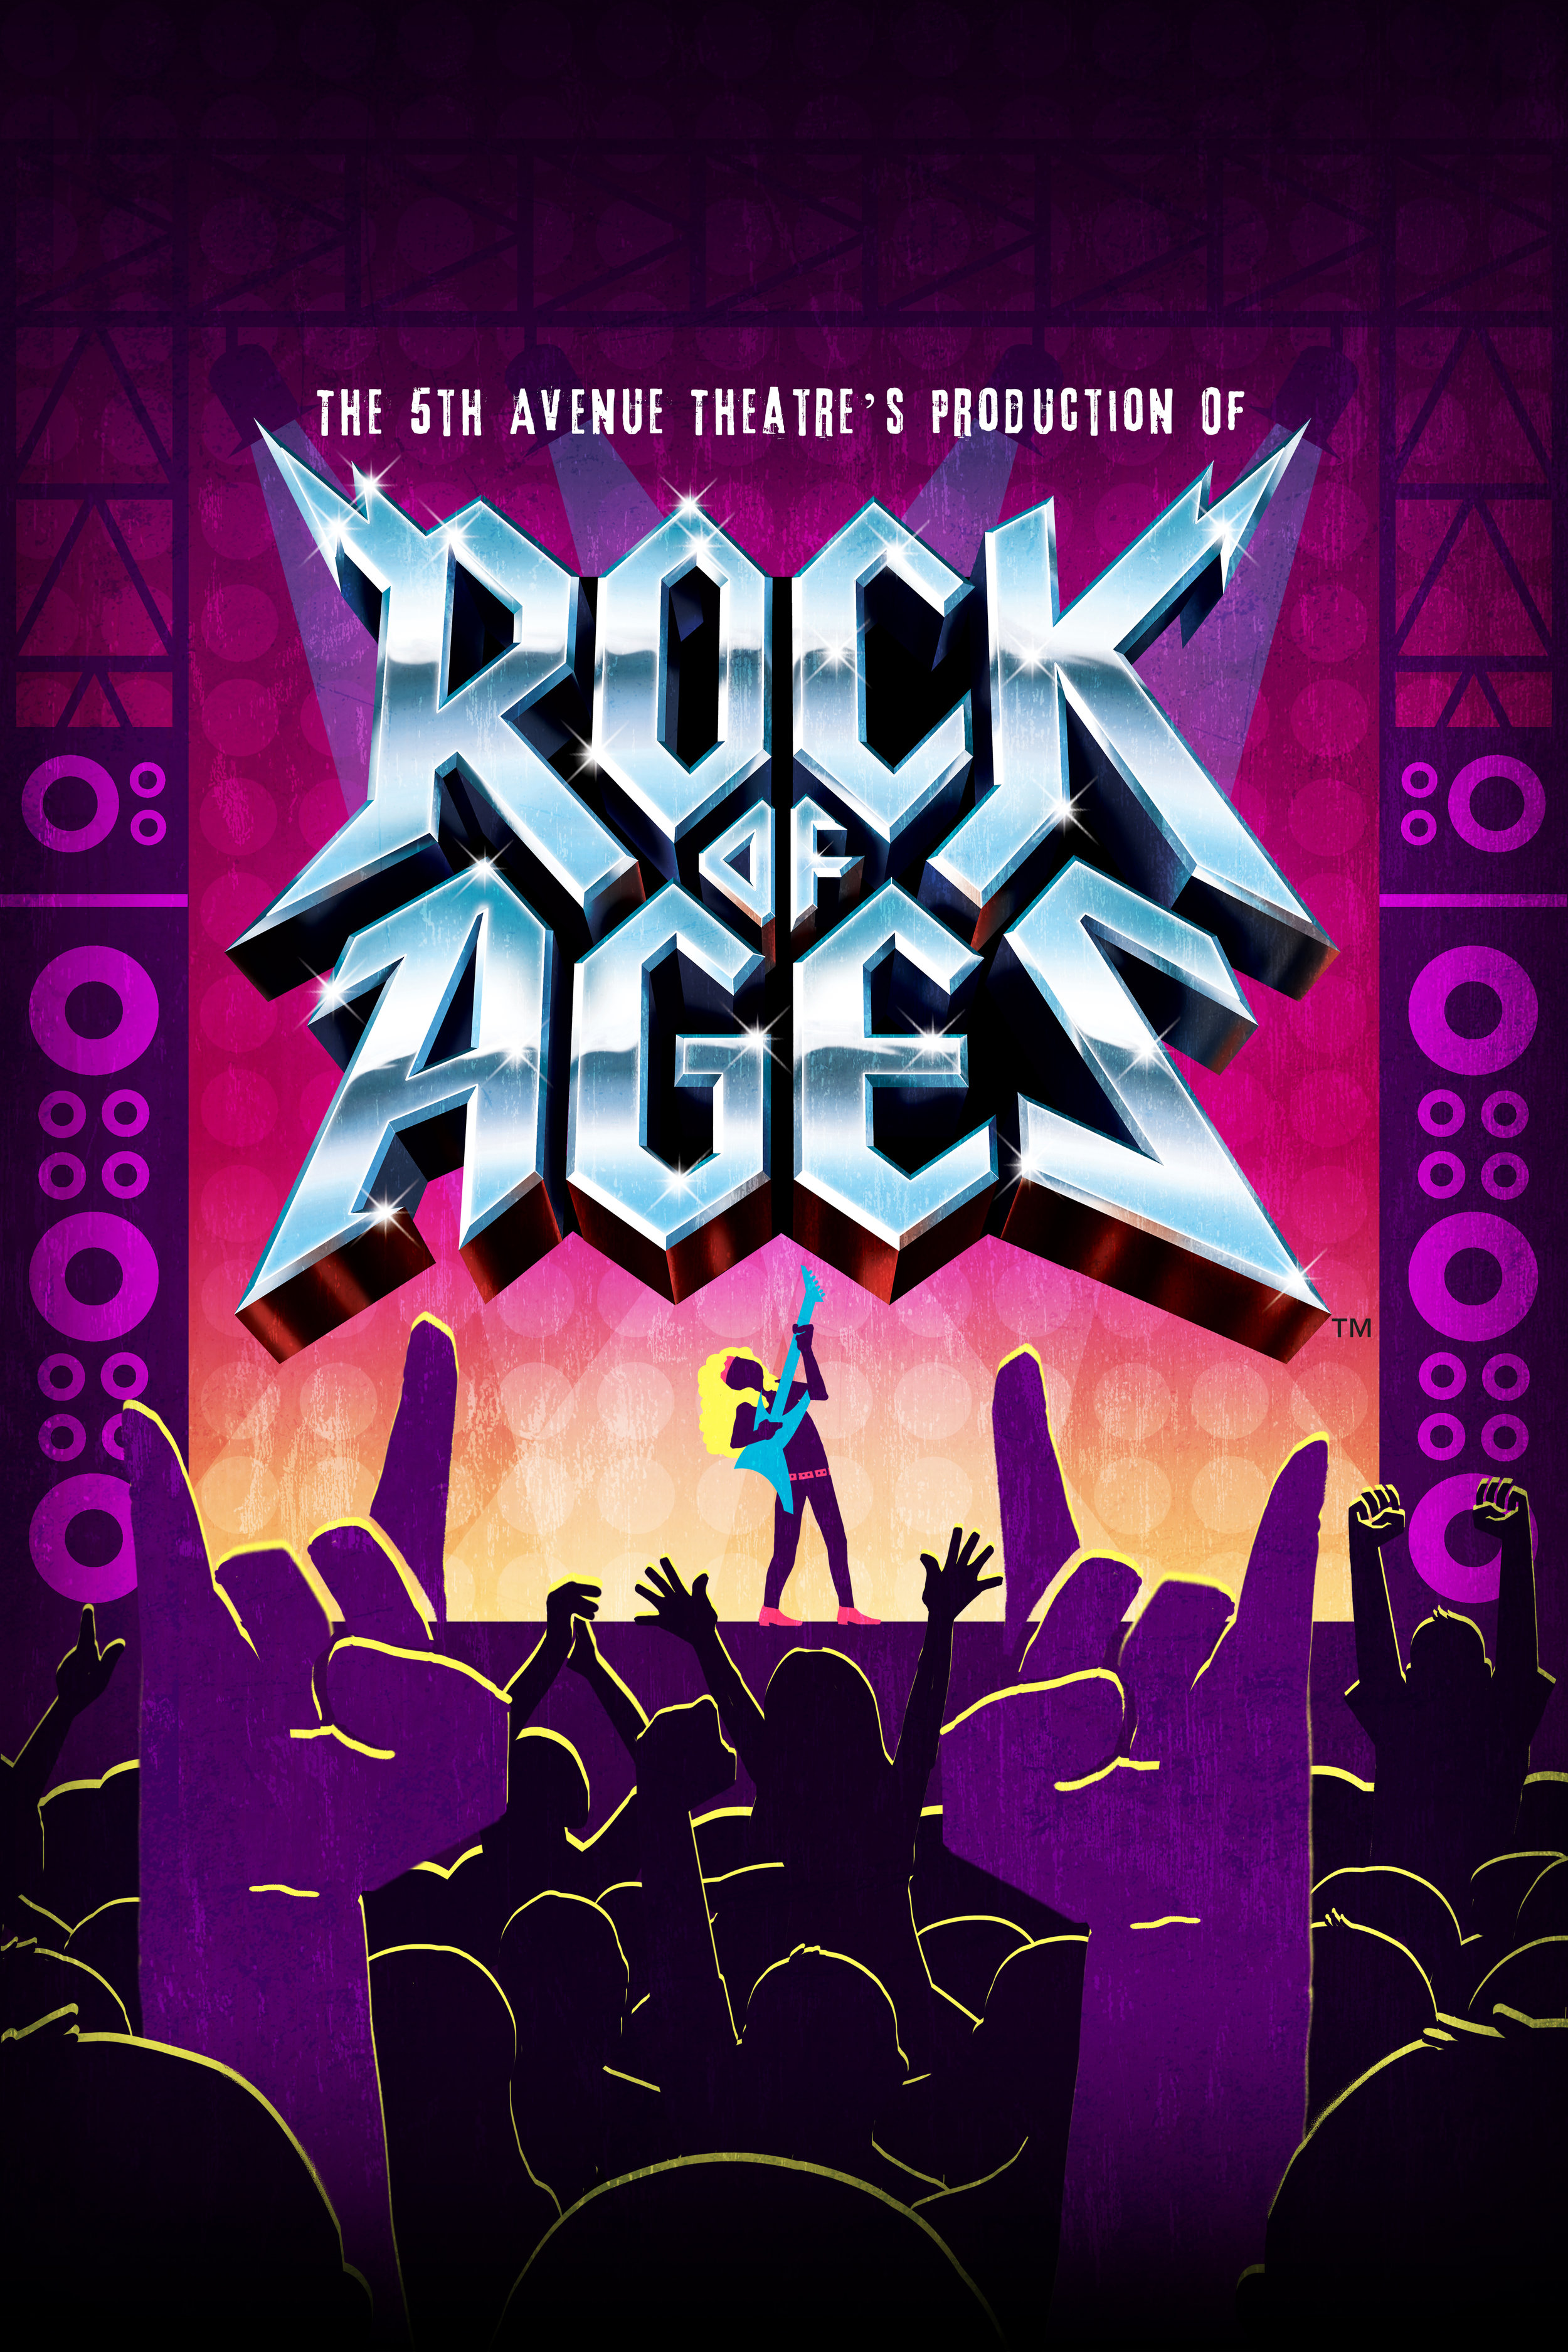 rock of ages logo